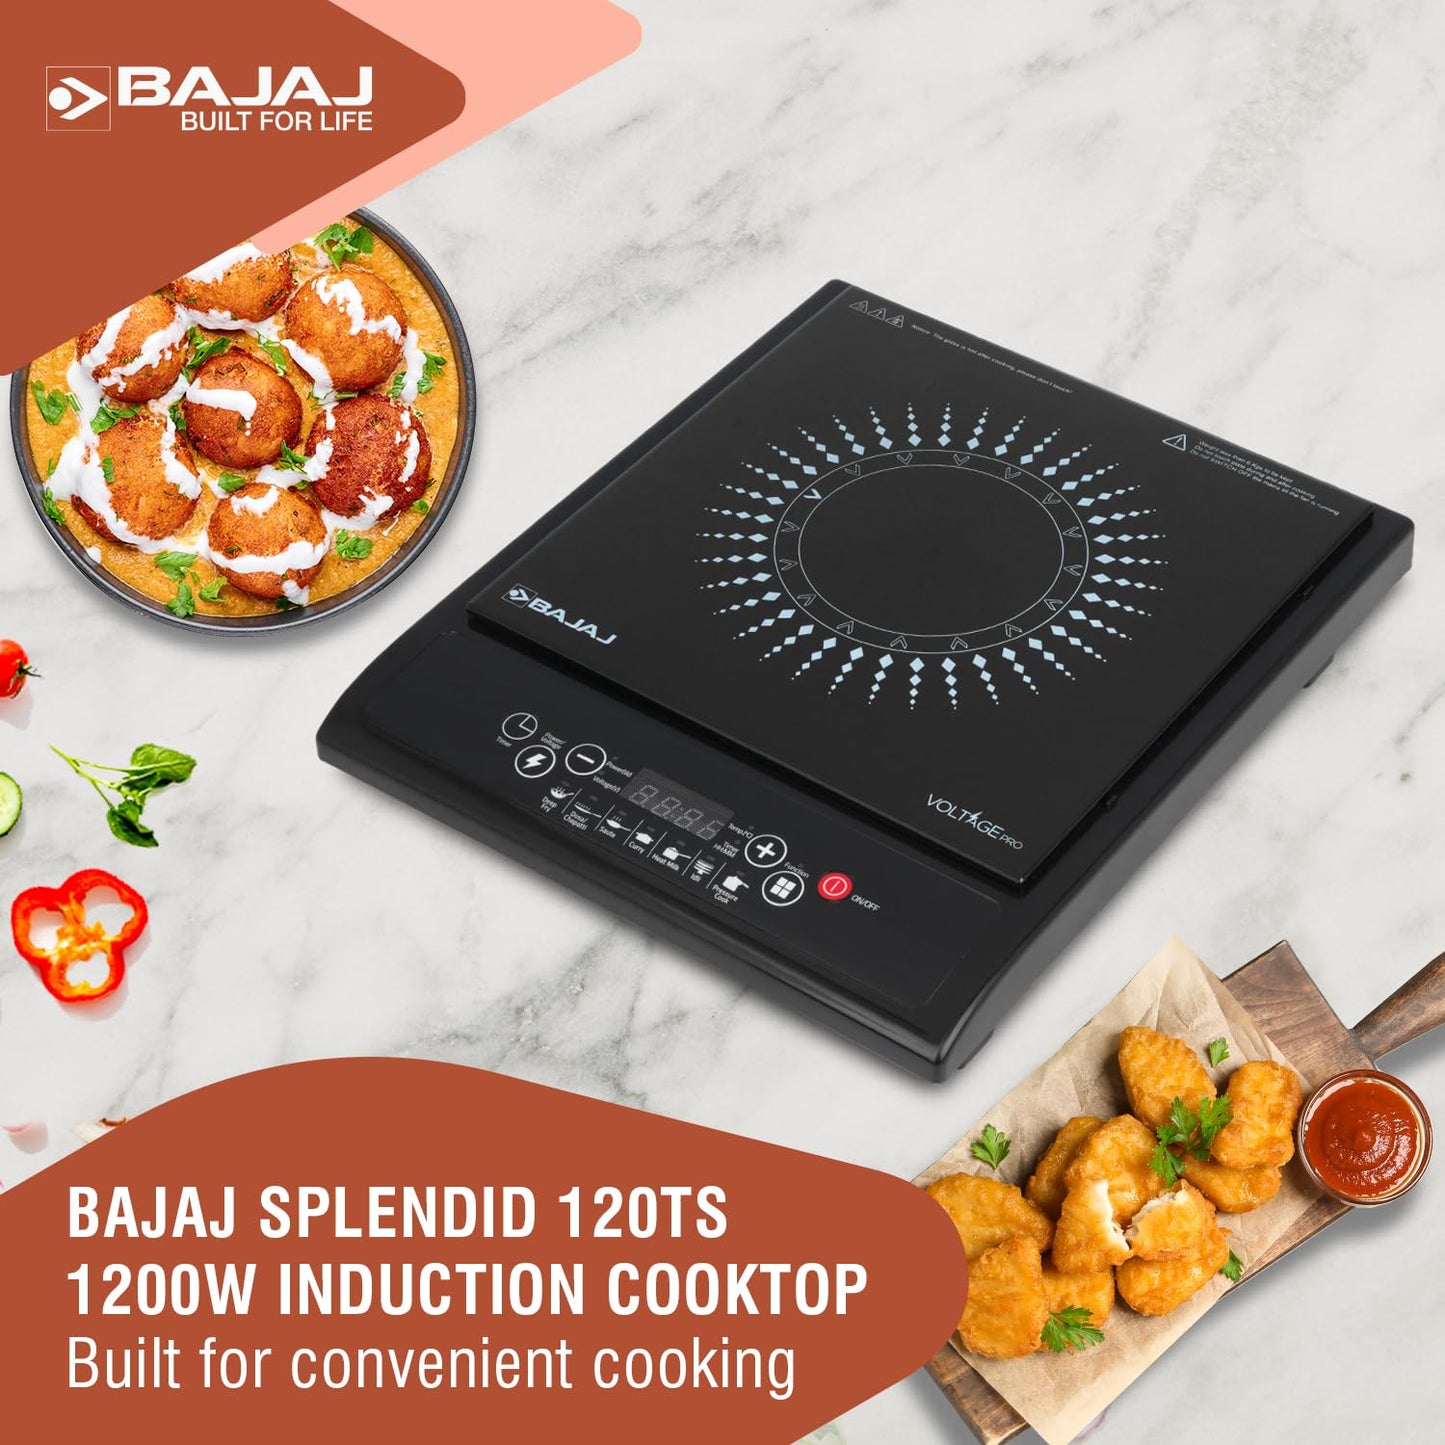 Bajaj Splendid 120TS 1200W Induction Cooktop with Tact Switch (Black/White)